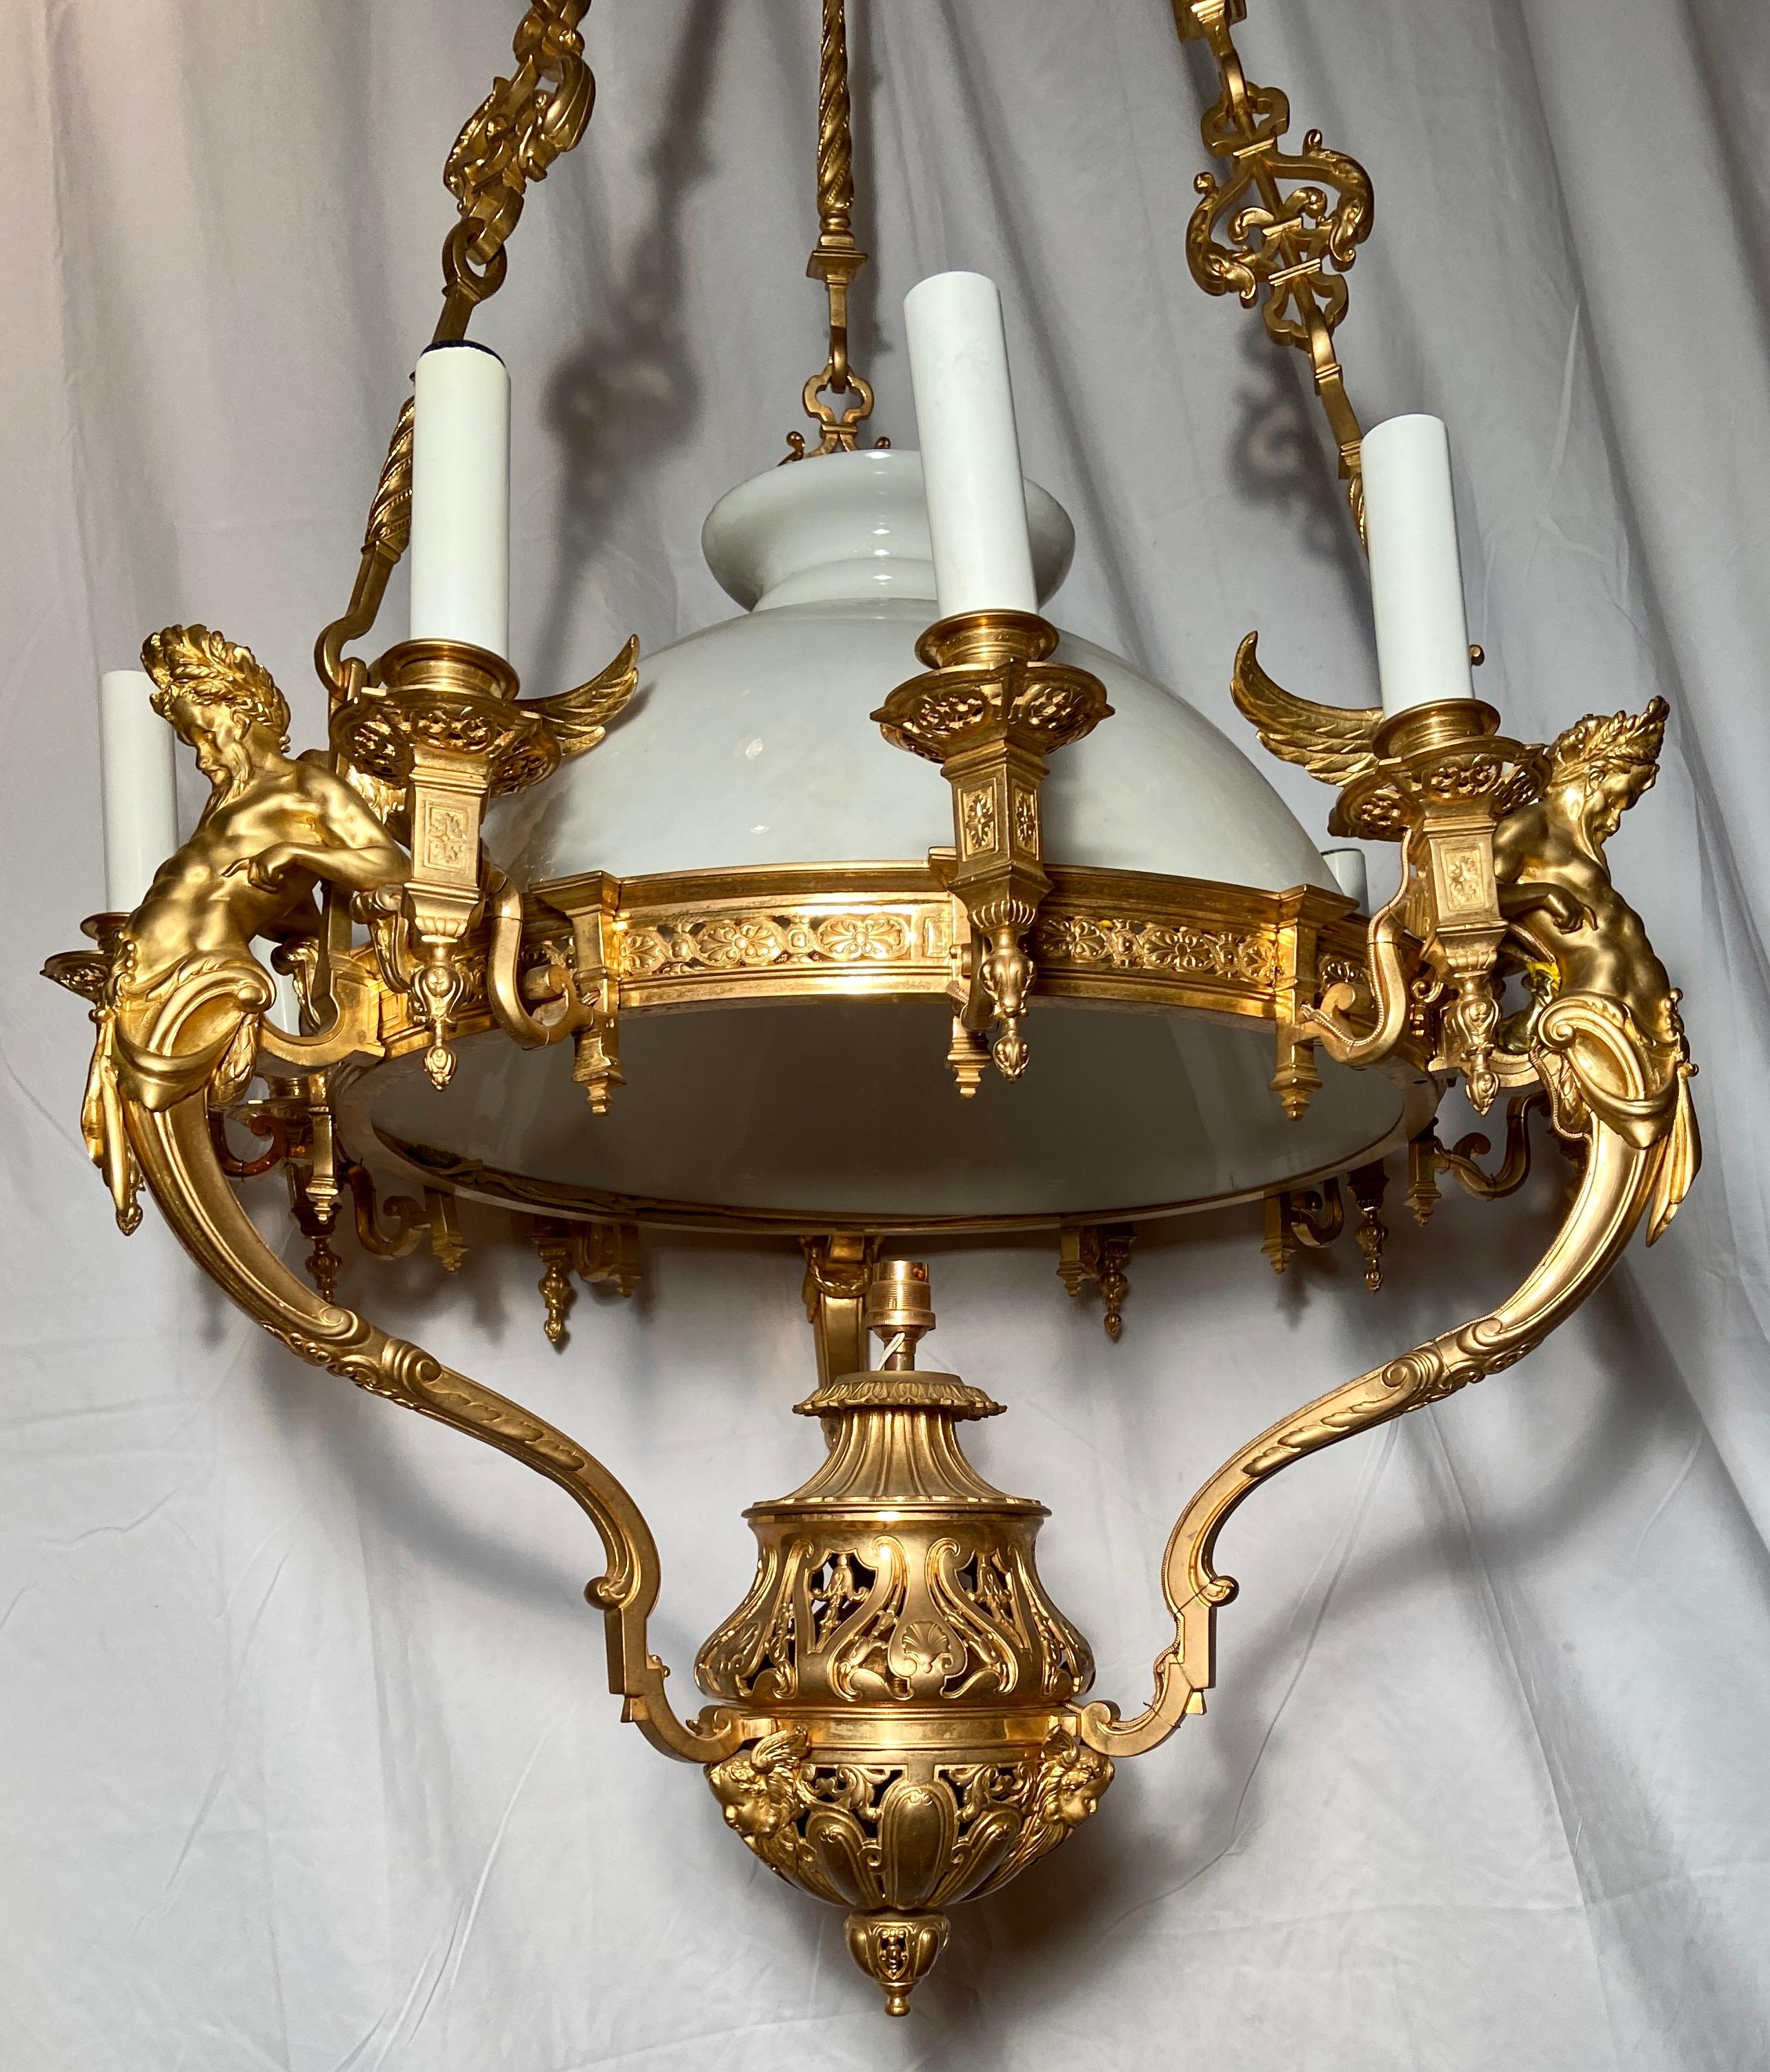 Exquisite antique French gold bronze & opal white gAlass suspension oil lamp chandelier, Circa 1880's with classical figures.